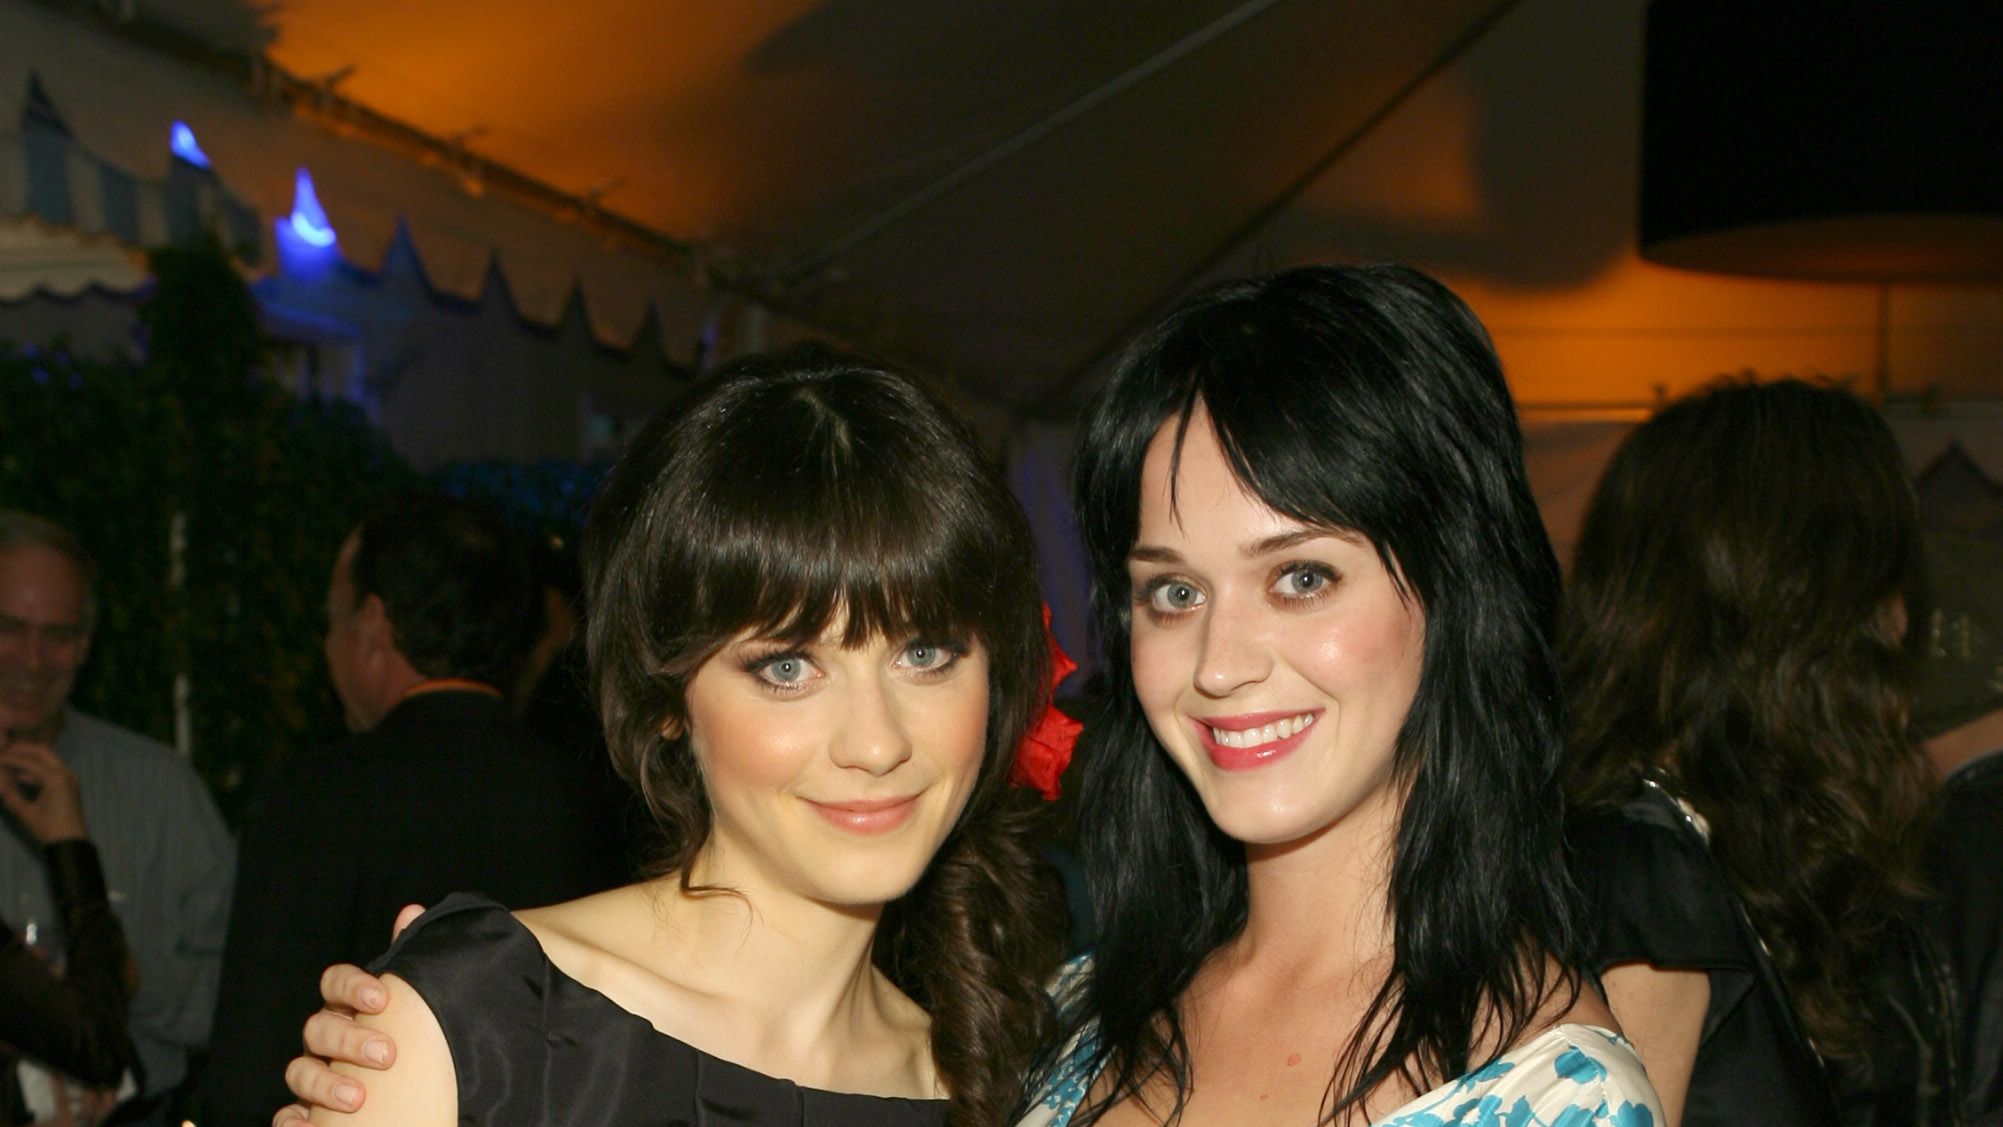 Katy Perry Pretended to be Zooey Deschanel to Get Into Clubs